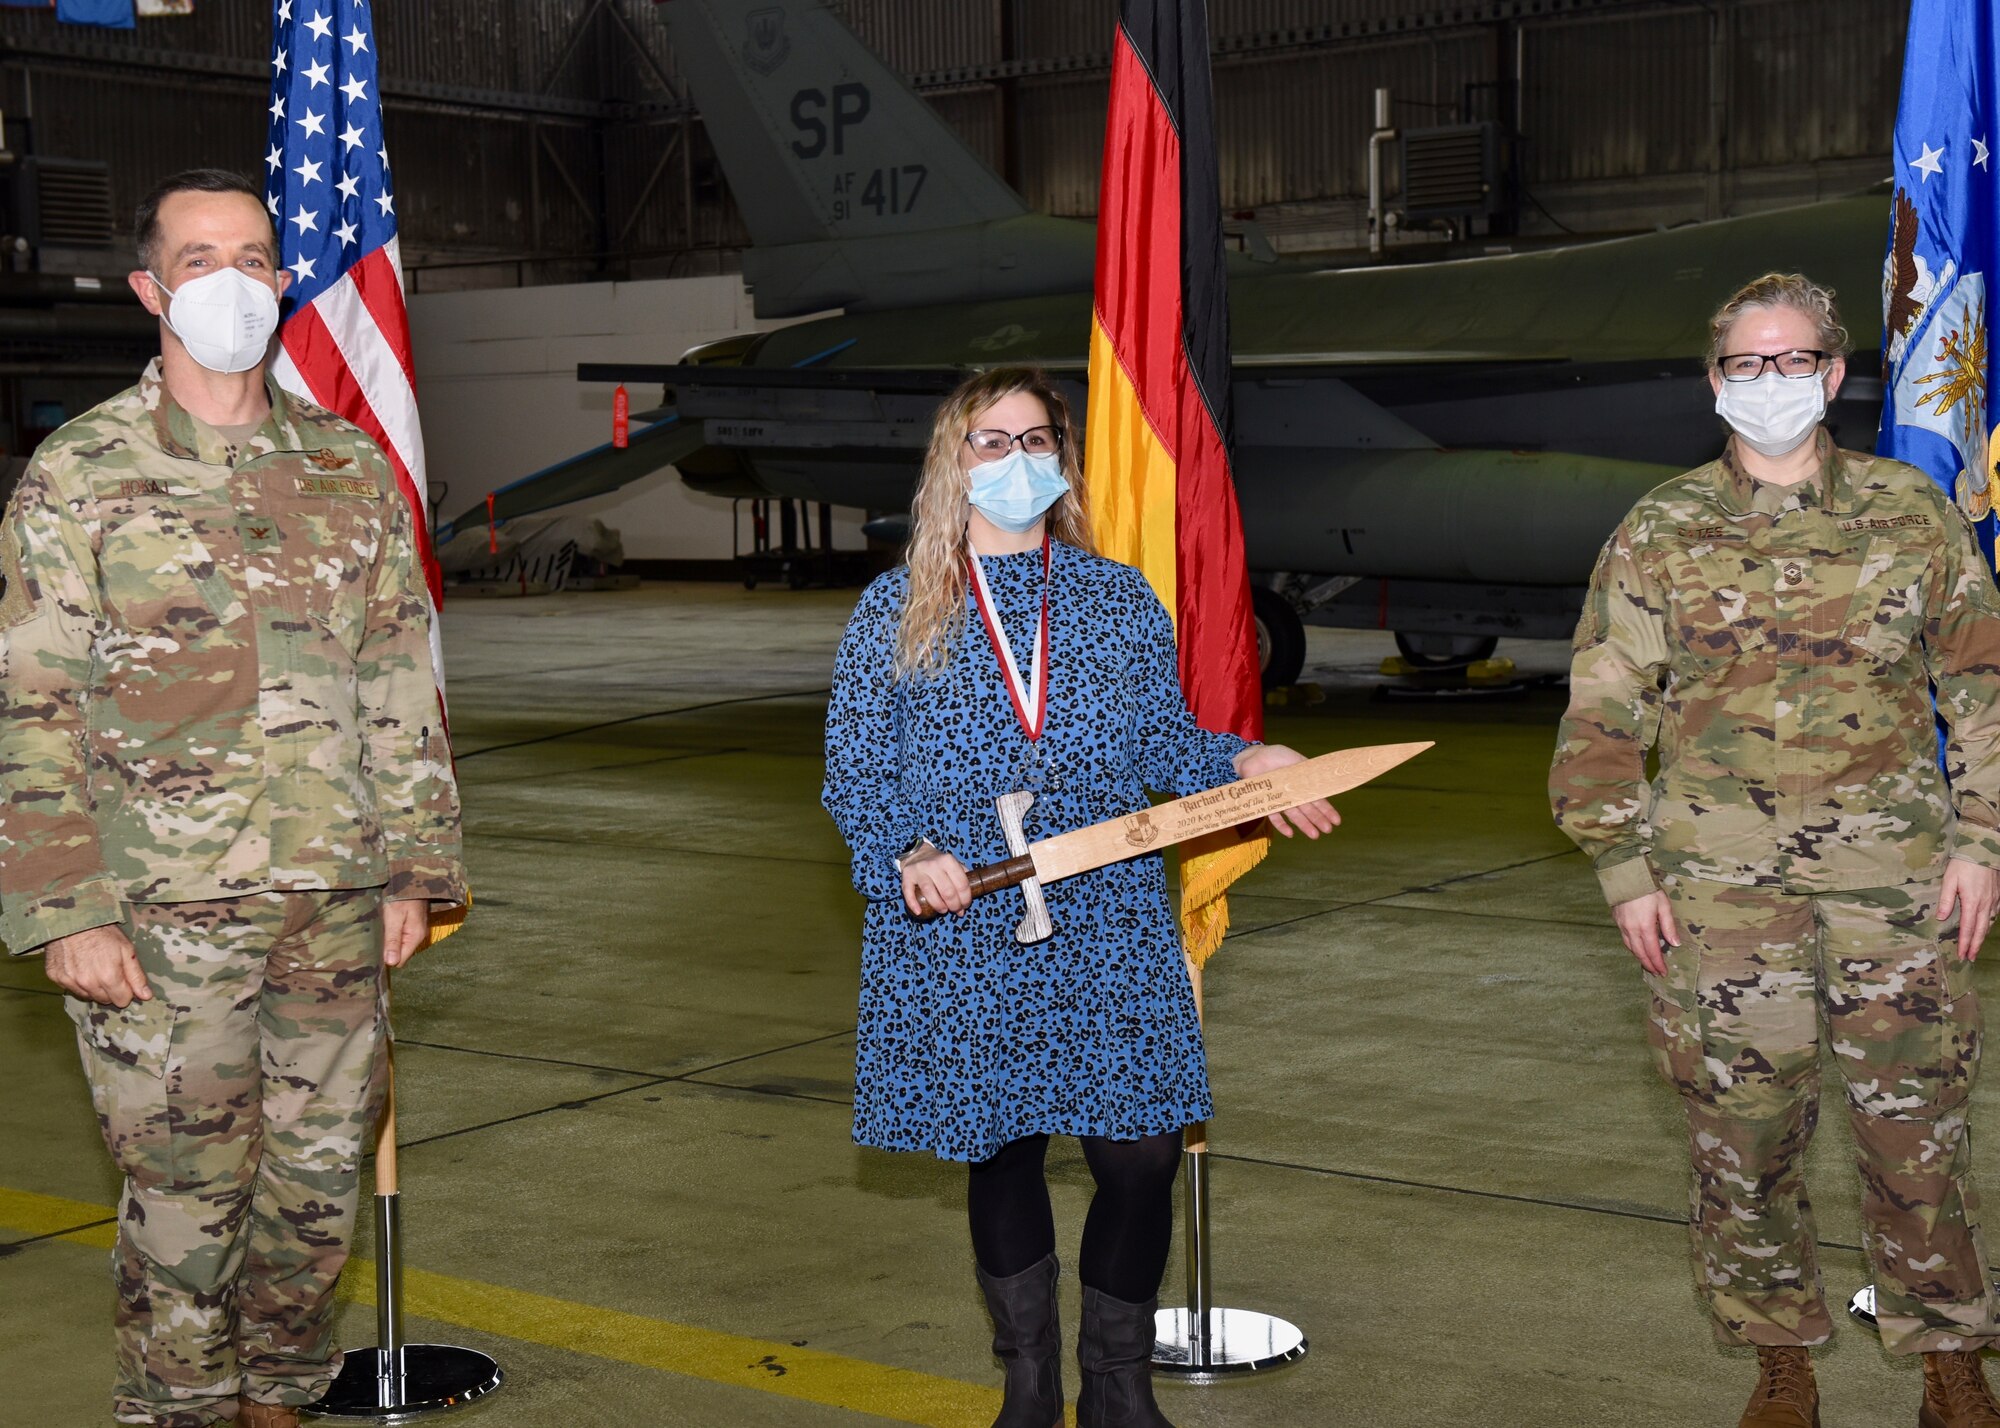 U.S. Air Force Col. Jason Hokaj, 52nd Fighter Wing vice commander (left), and Chief Master Sgt. Stephanie Cates, 52nd Fighter Wing command chief (right), give the Key Spouse of the Year award to Racheal Godfrey, 52nd Fighter Wing, Feb. 5, 2021, at Spangdahlem Air Base, Germany.